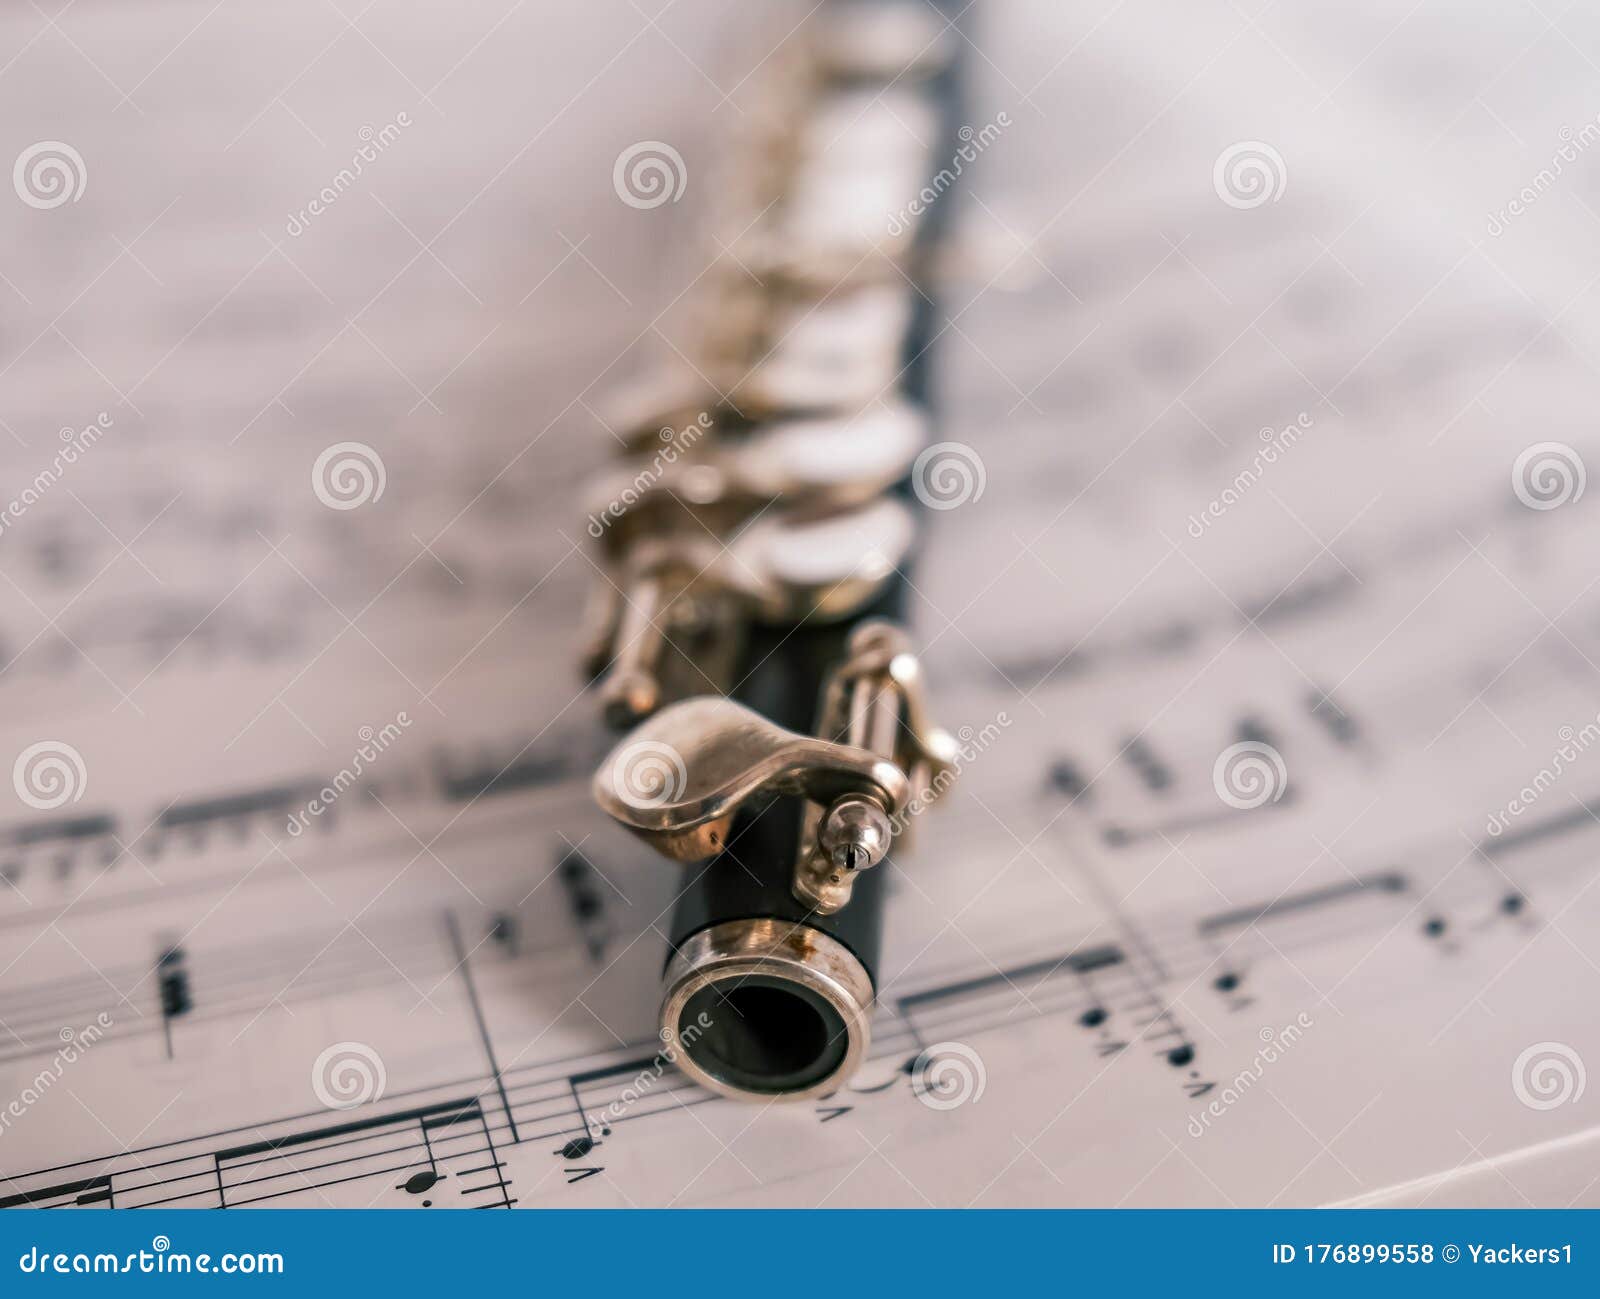 Close Up of Wooden Flute on Unidentifiable Sheet Music Stock Photo - Image  of piccolo, keys: 176899558